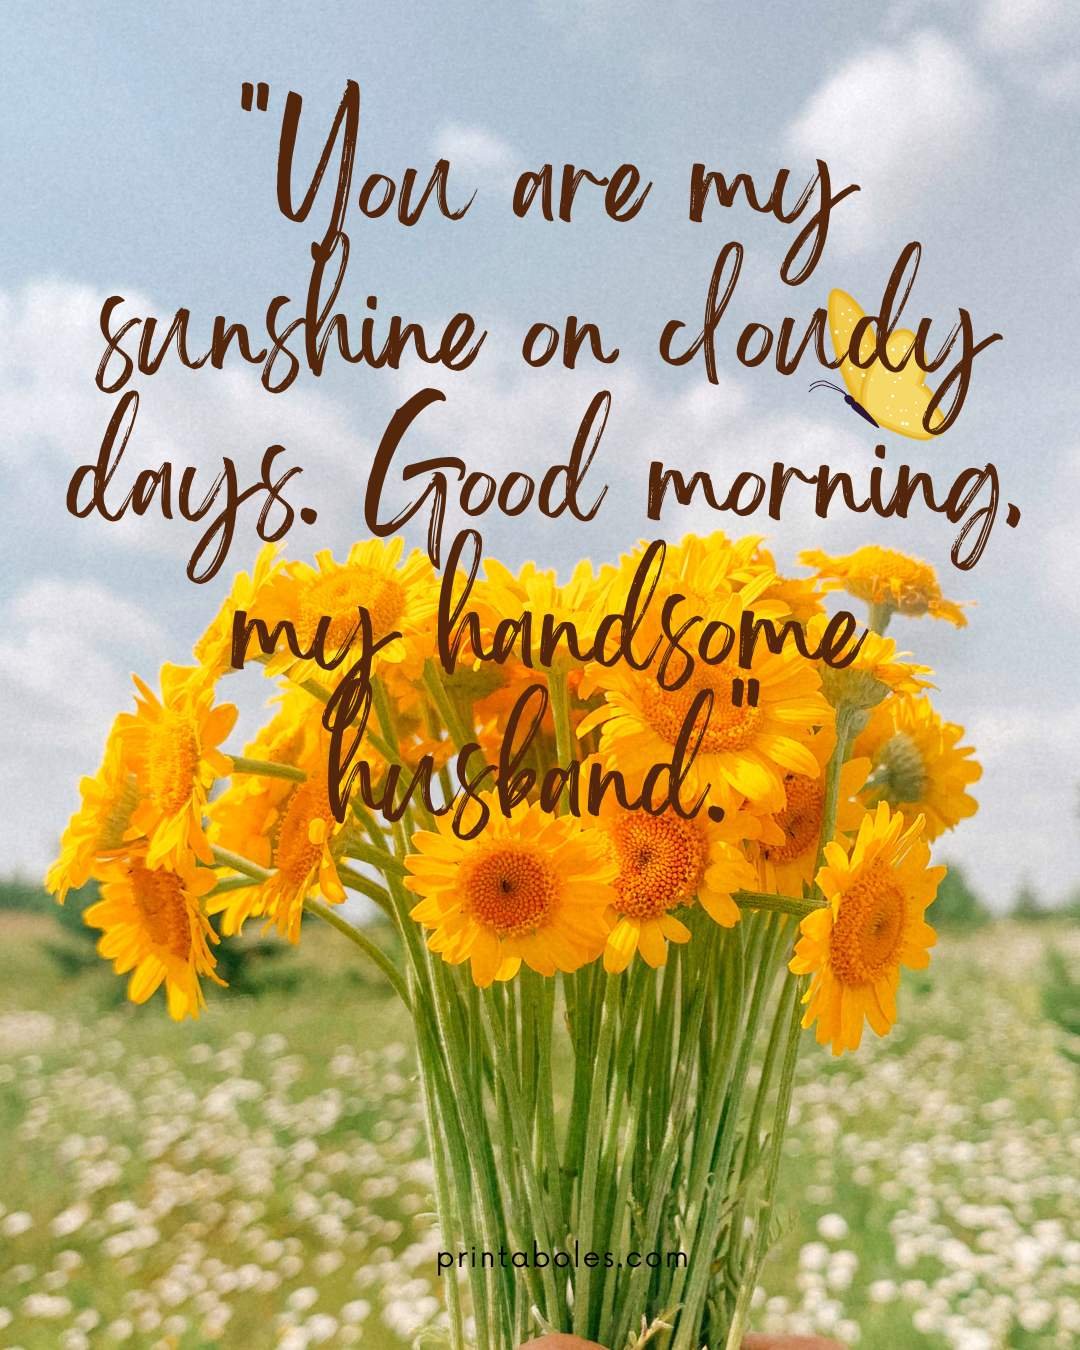 40 Printable Good Morning Quotes to Brighten Your Husband's Day ...